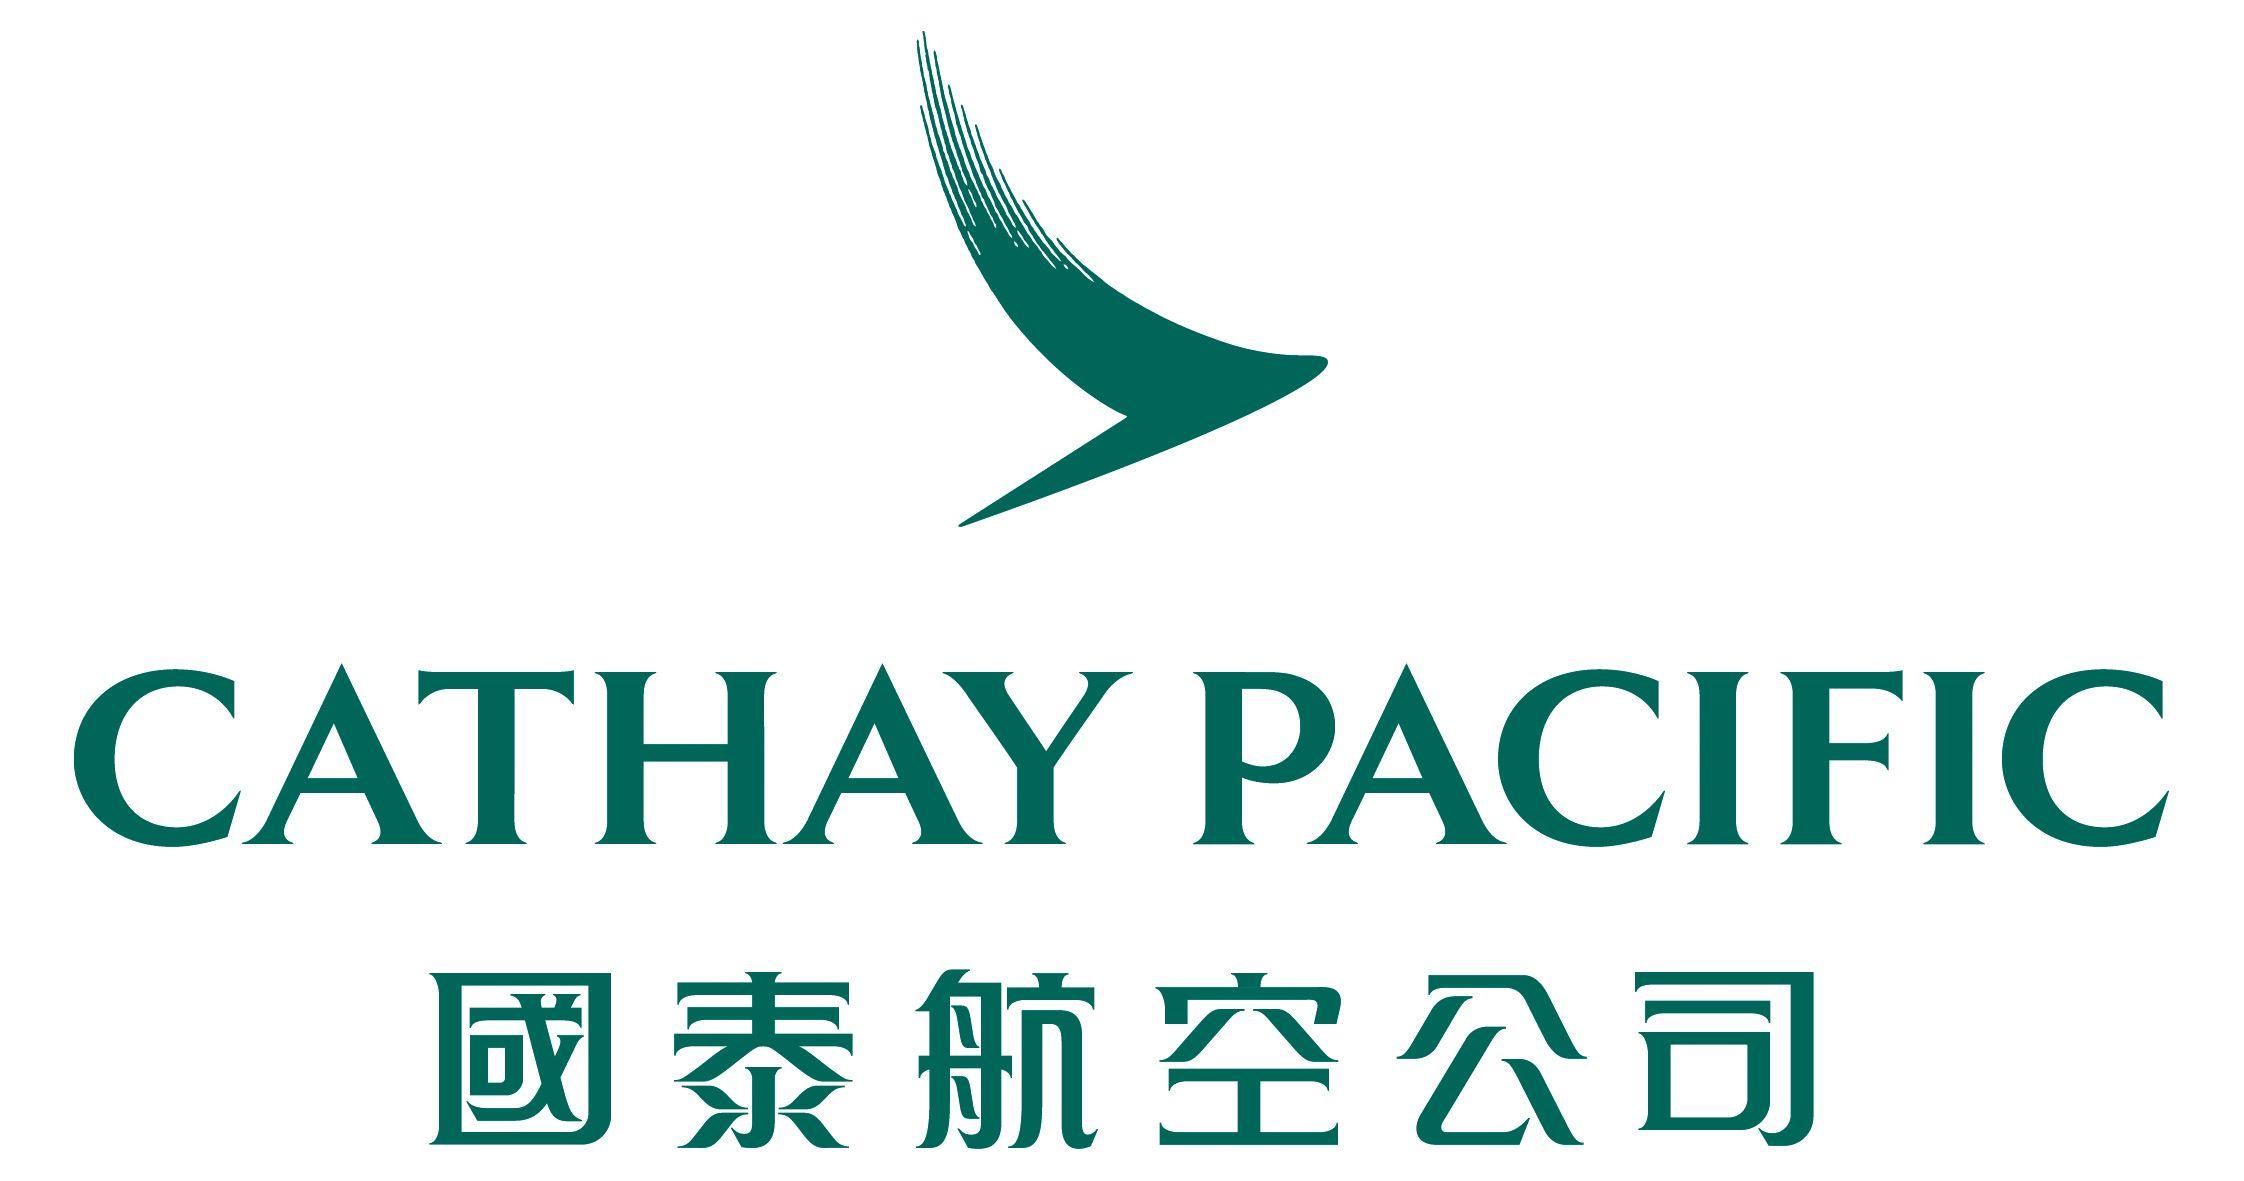 Cathay Pacific Logo - Cathay Agents